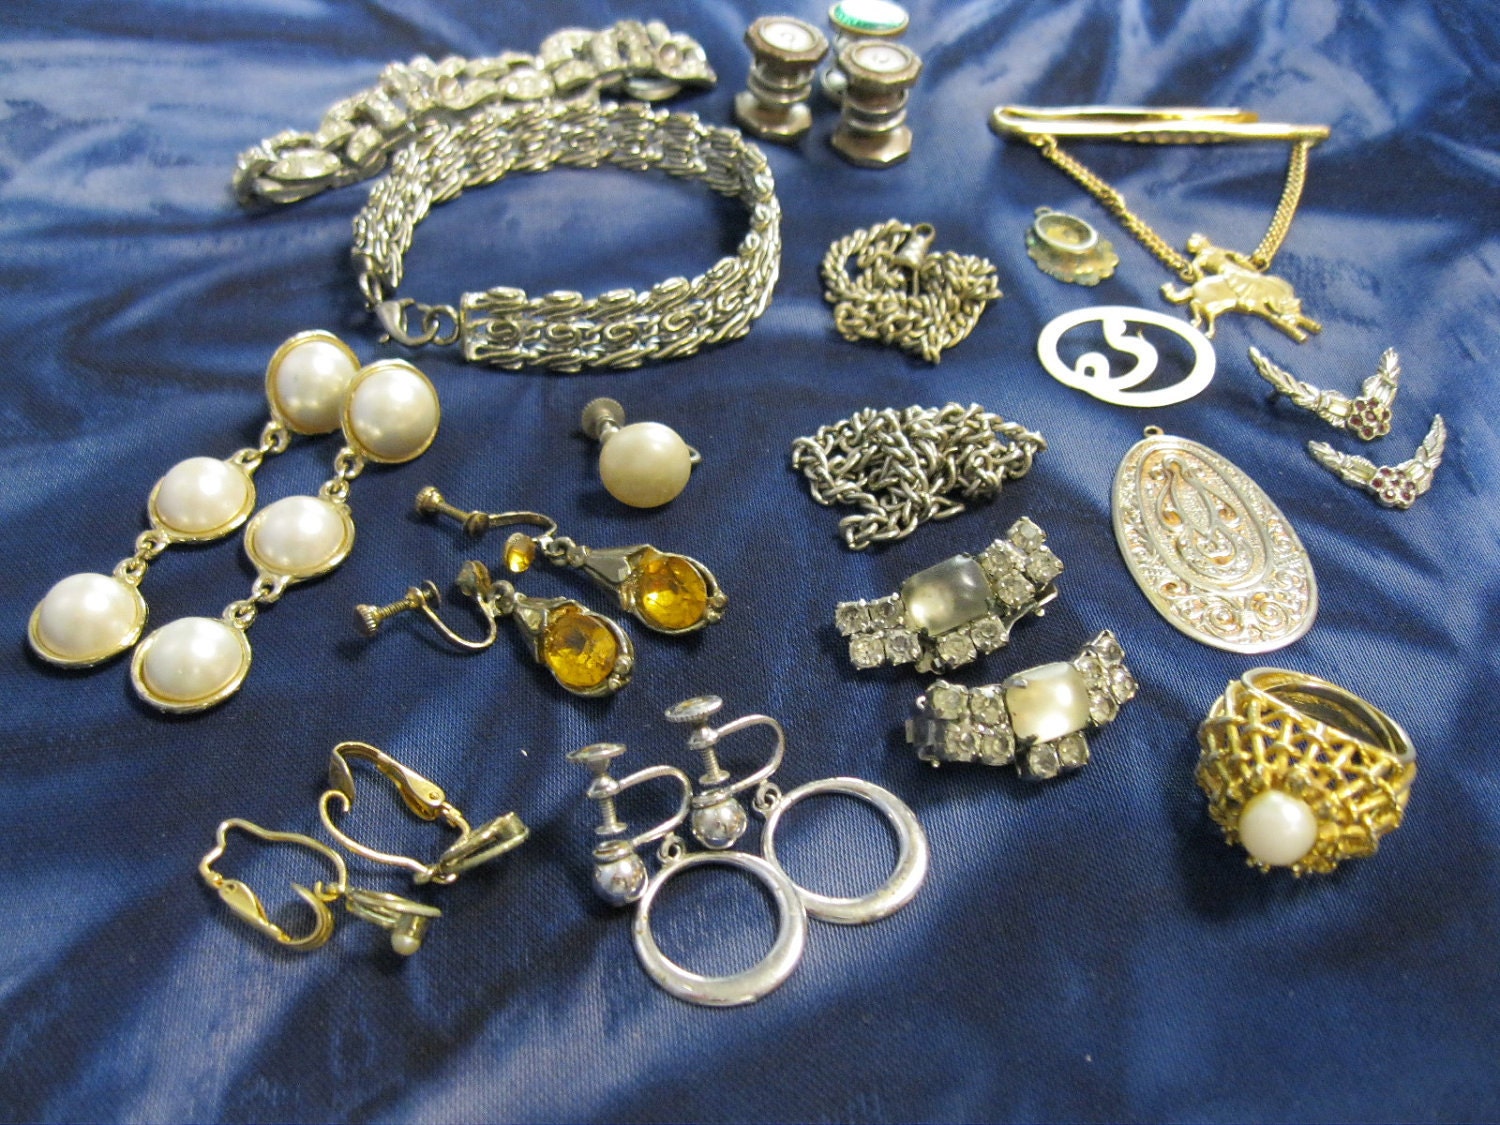 Vintage Junk Jewelry Lot For Crafts or by vickiesvintageporch